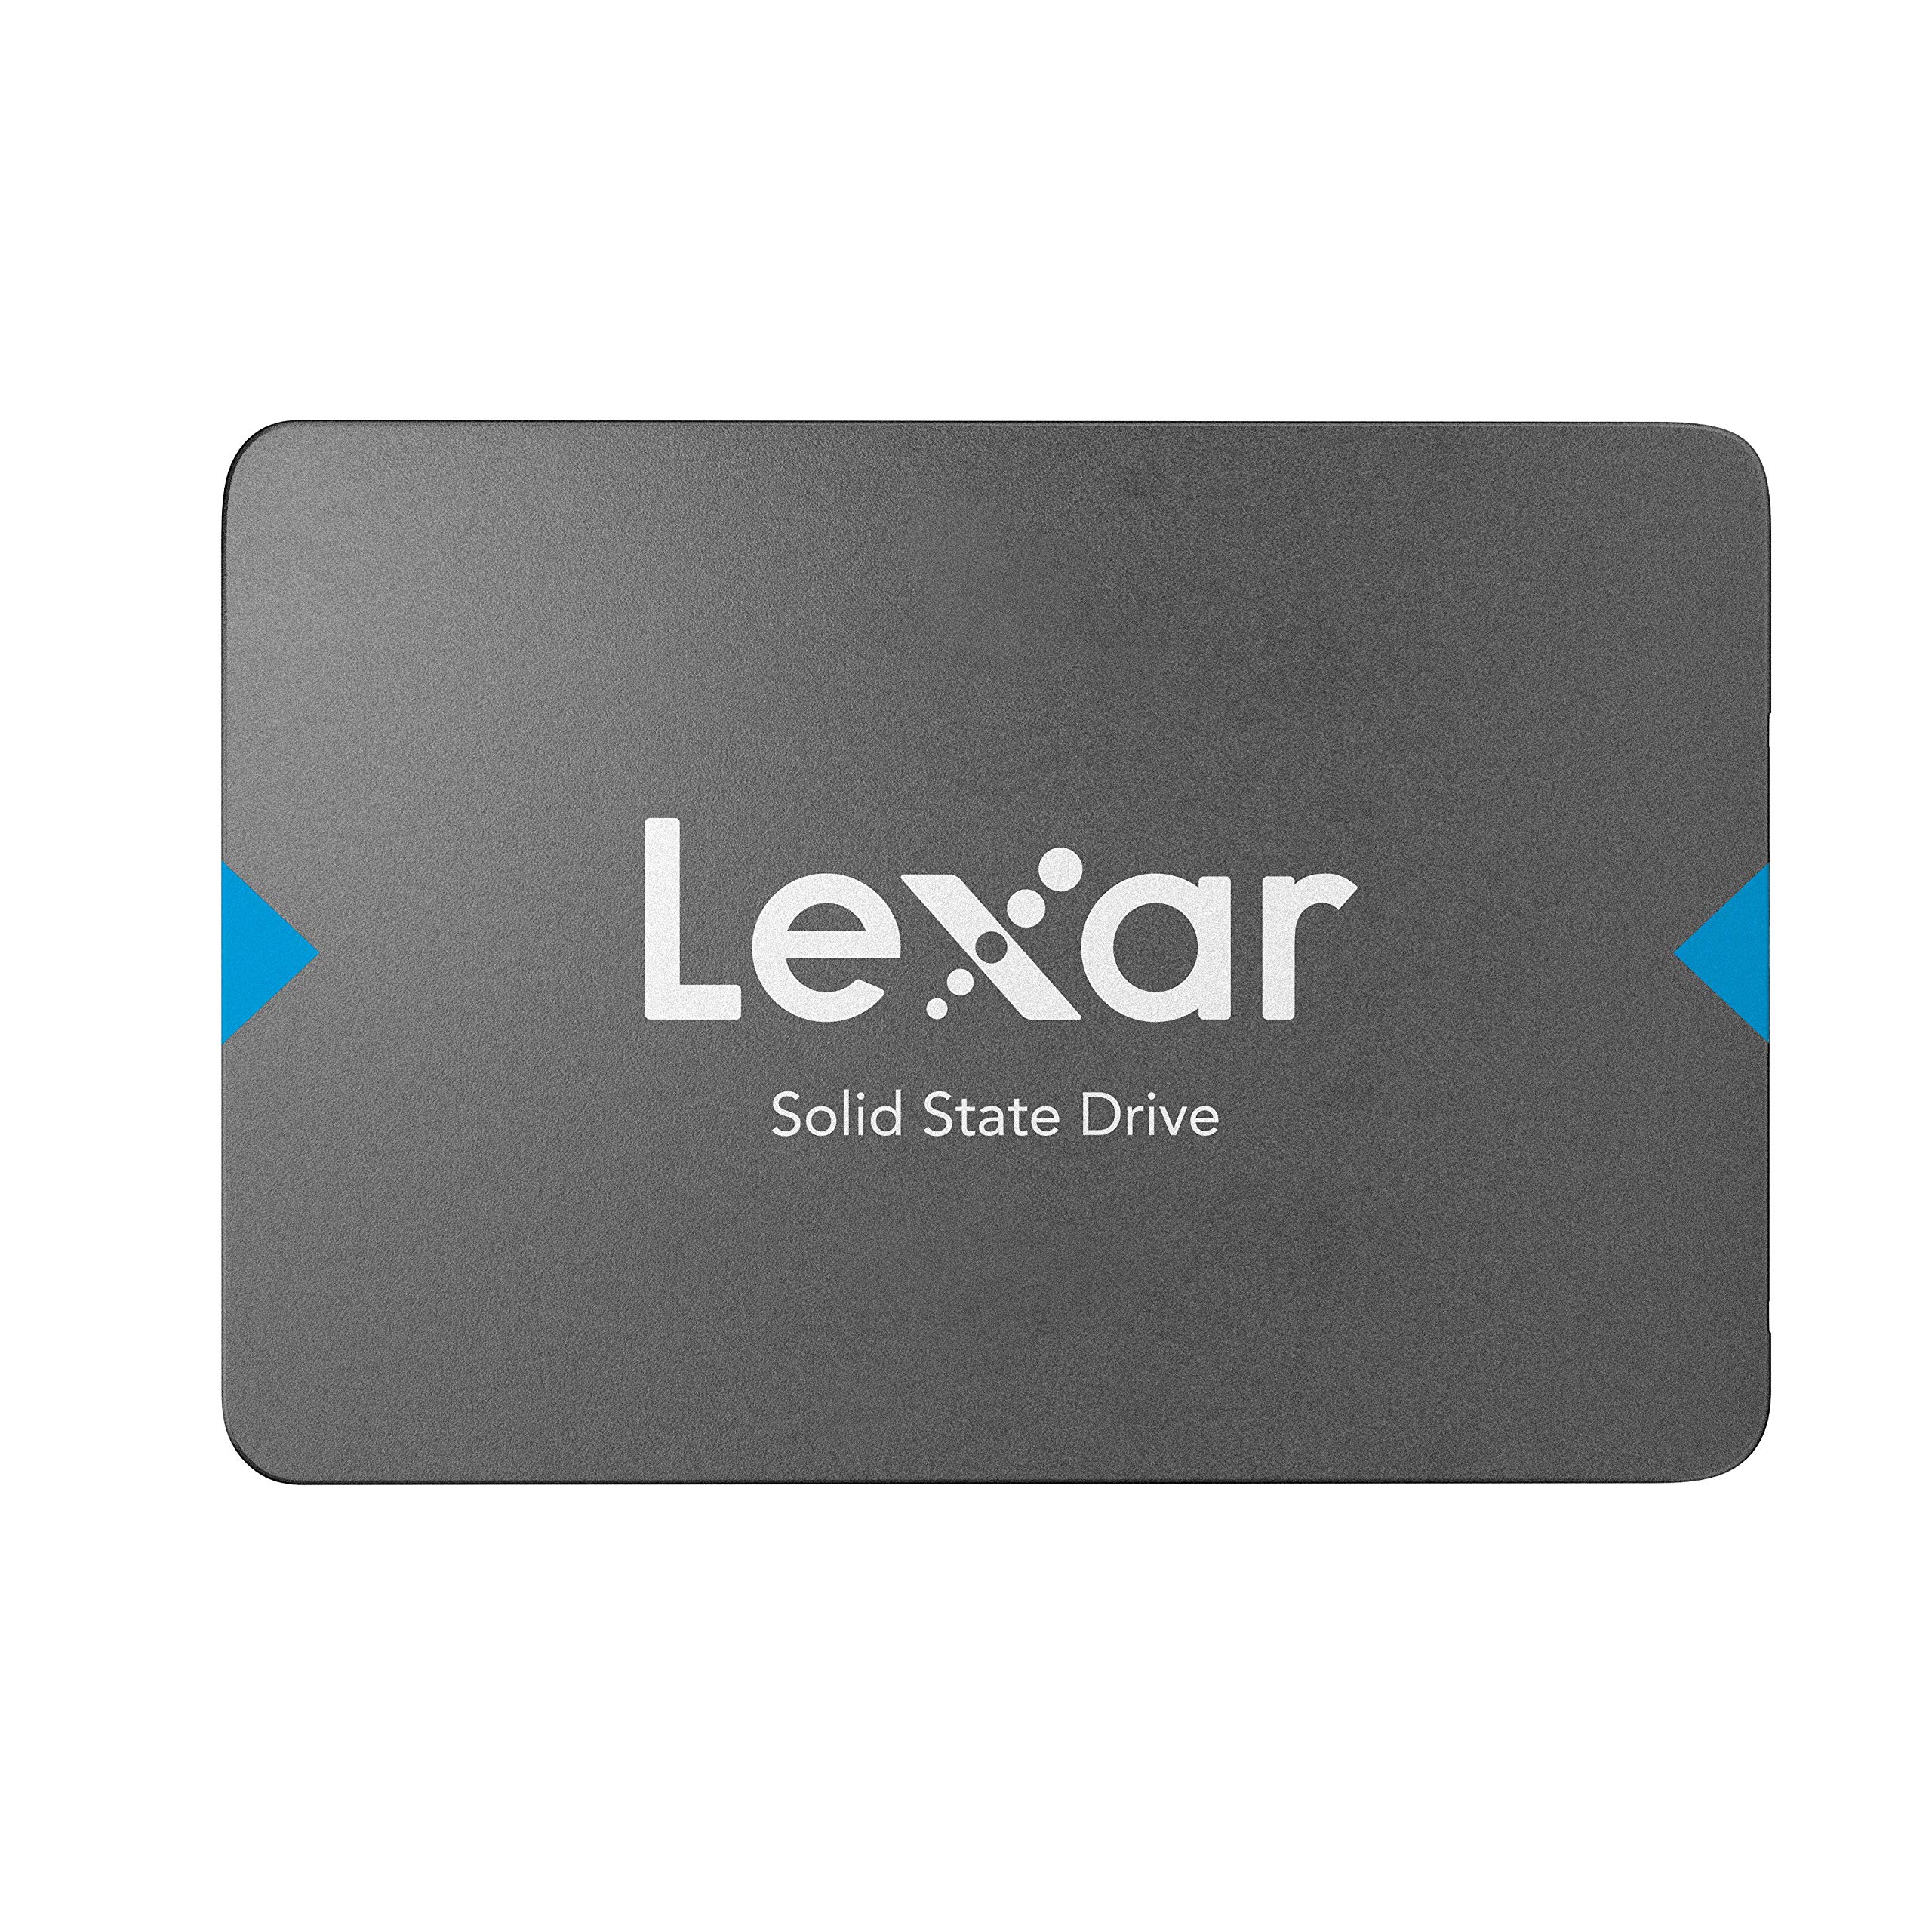 DISCO SOLIDO LEXAR 480GB SEQUENTIAL READ UP TO 550MB/S 2.5 SATA III (